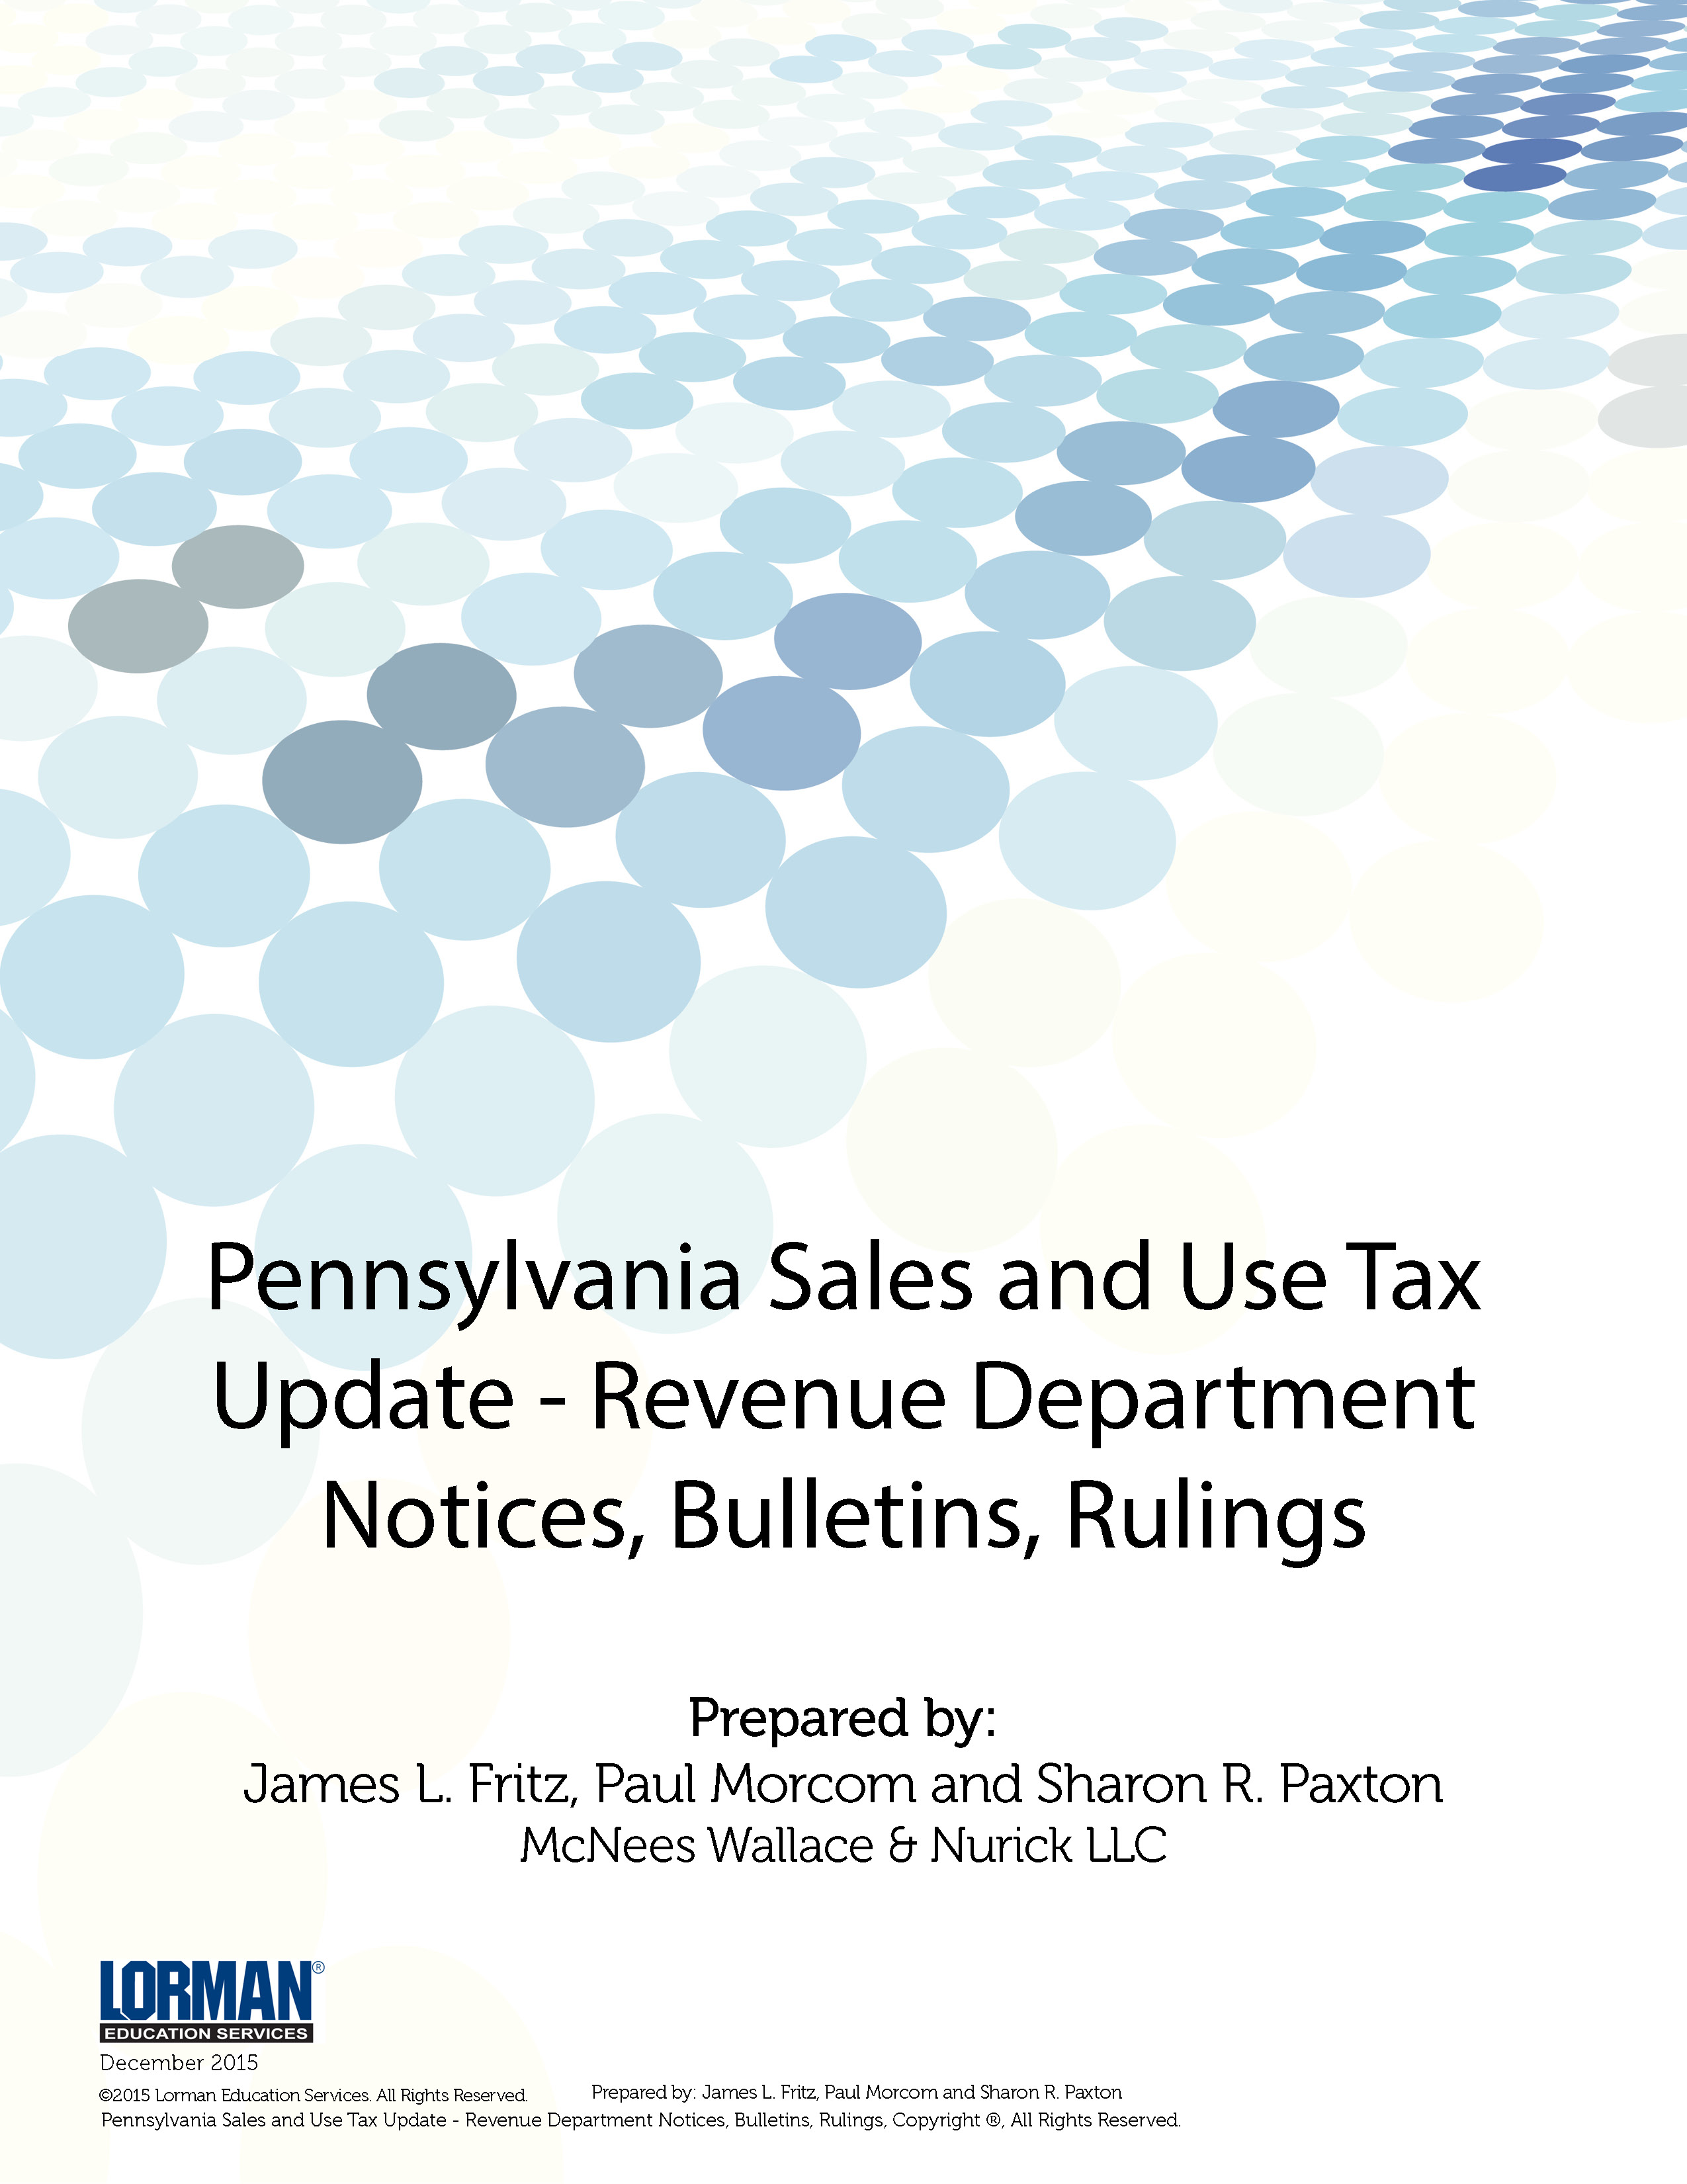 Pennsylvania Sales and Use Tax Update - Revenue Department Notices, Bulletins, Rulings